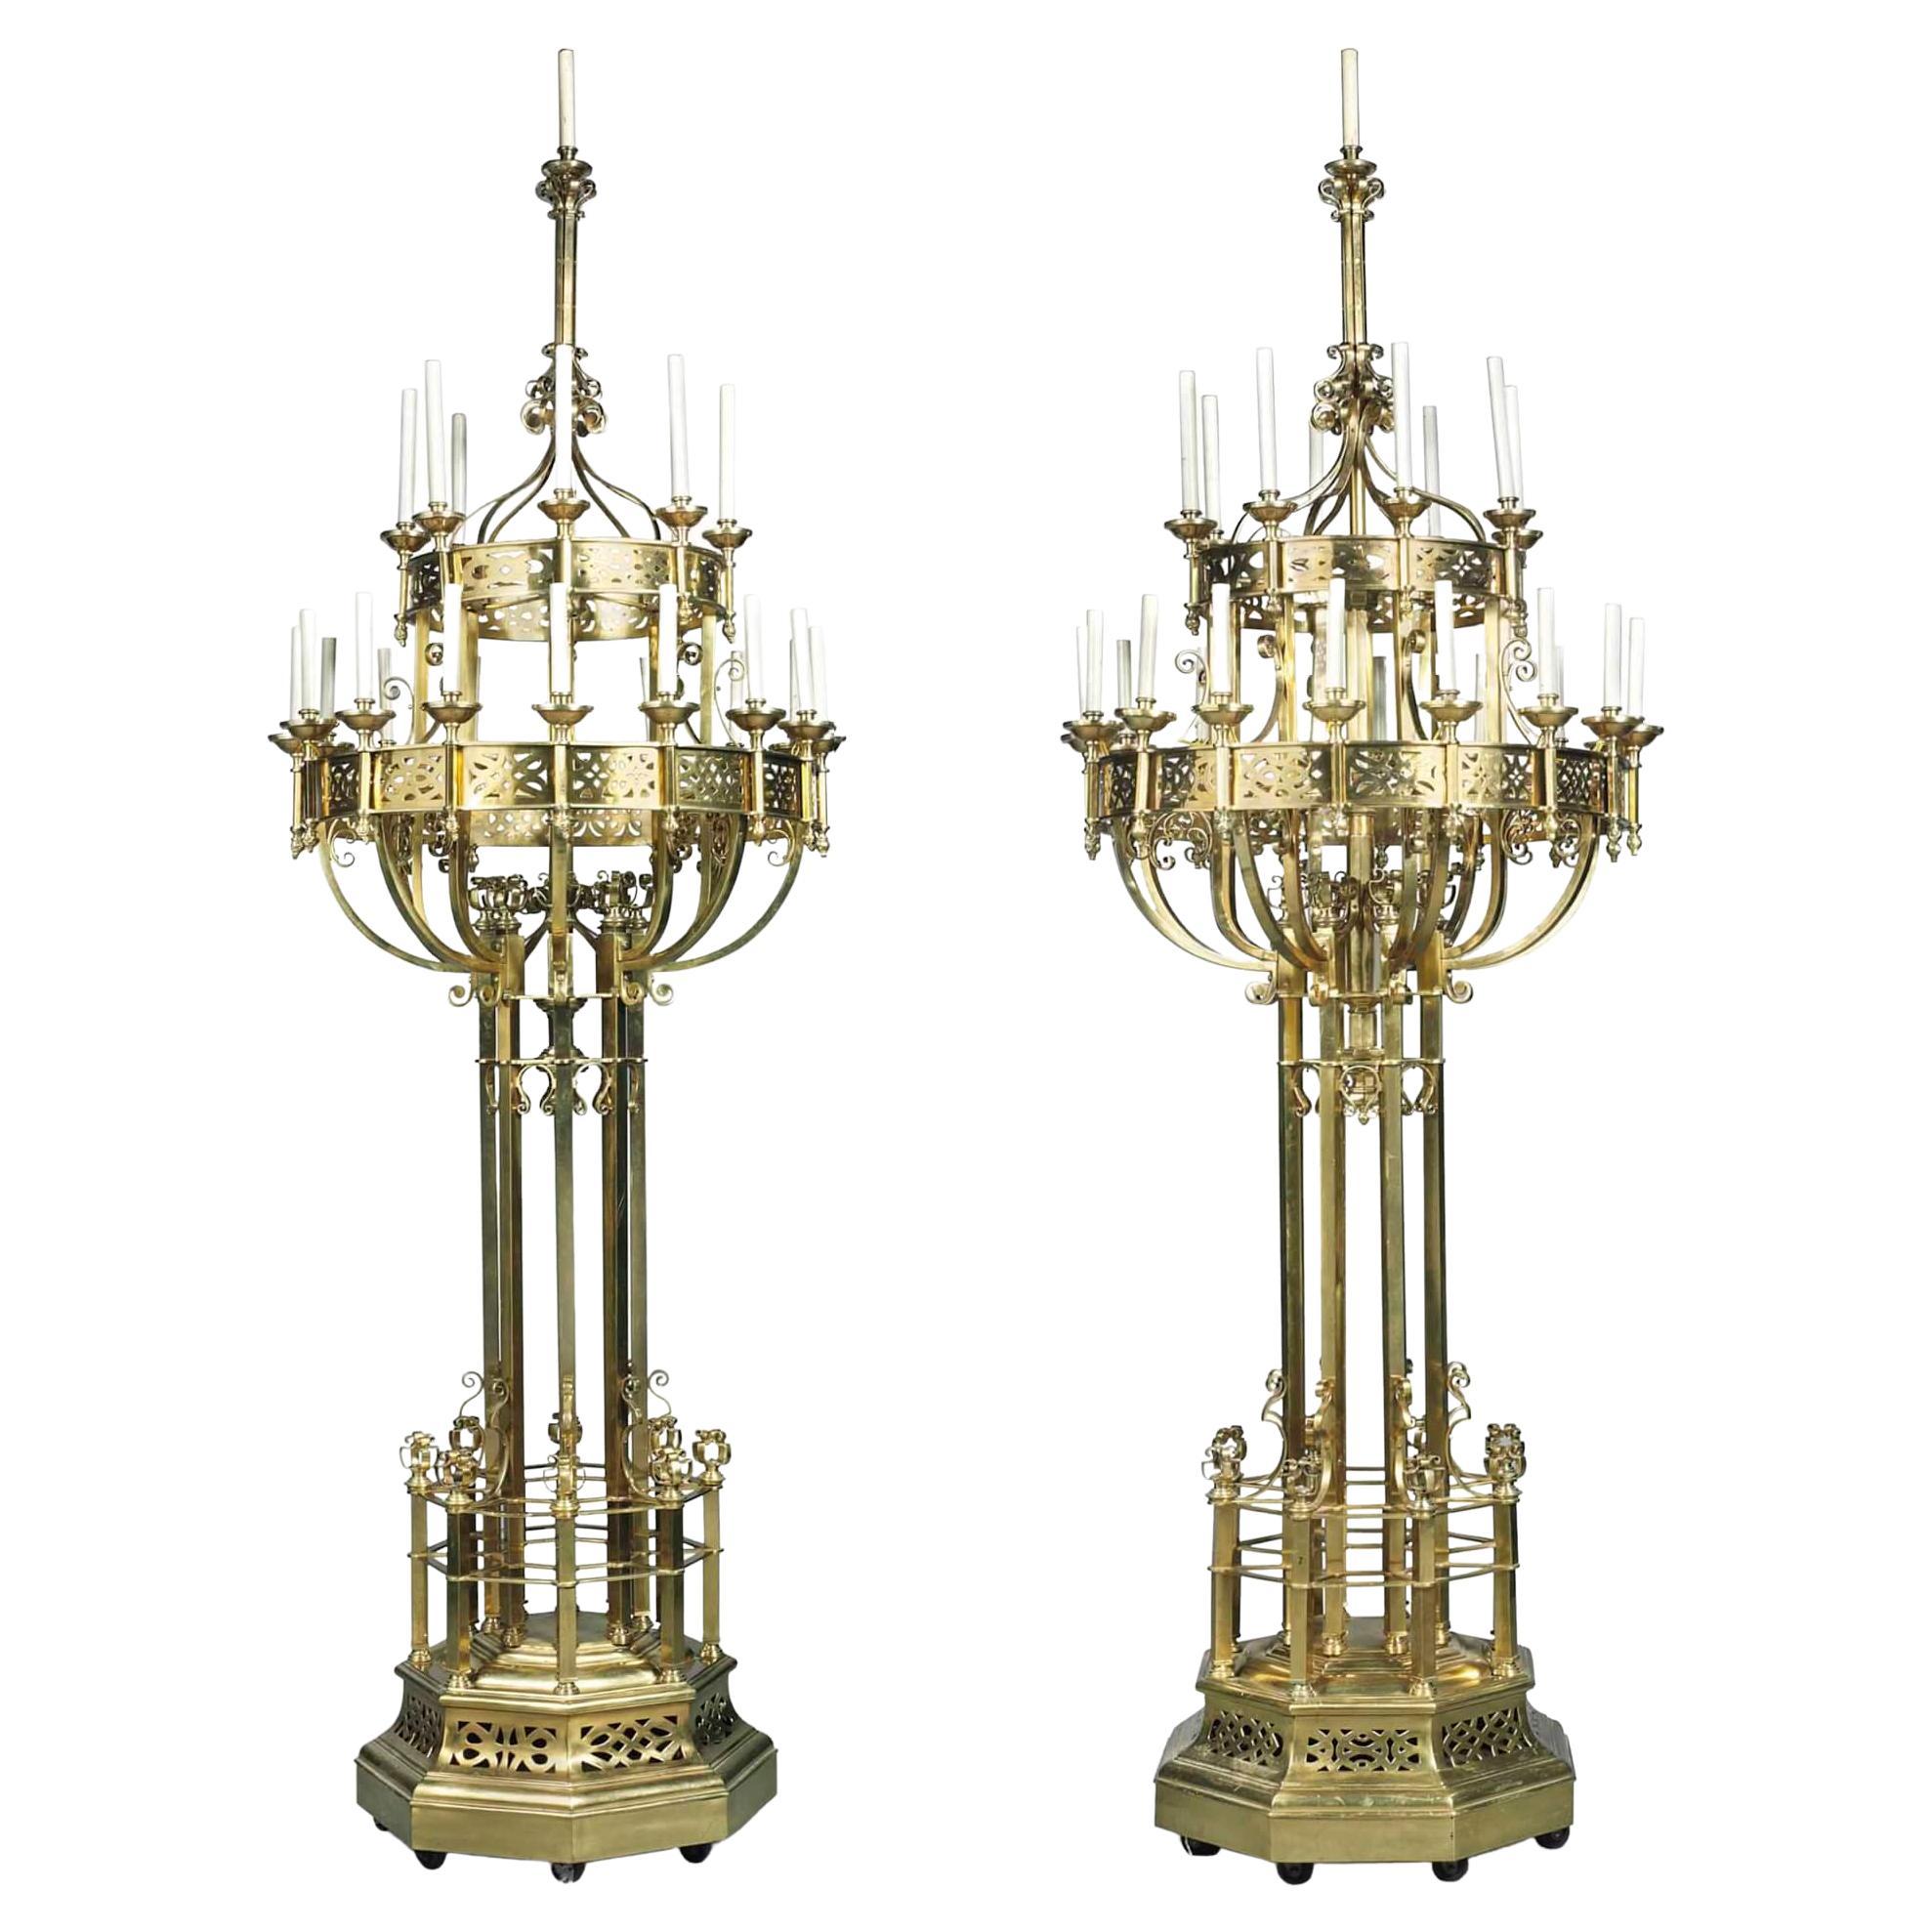 Pair of Very Large French Brass Candelabra in the Gothic Revival Style